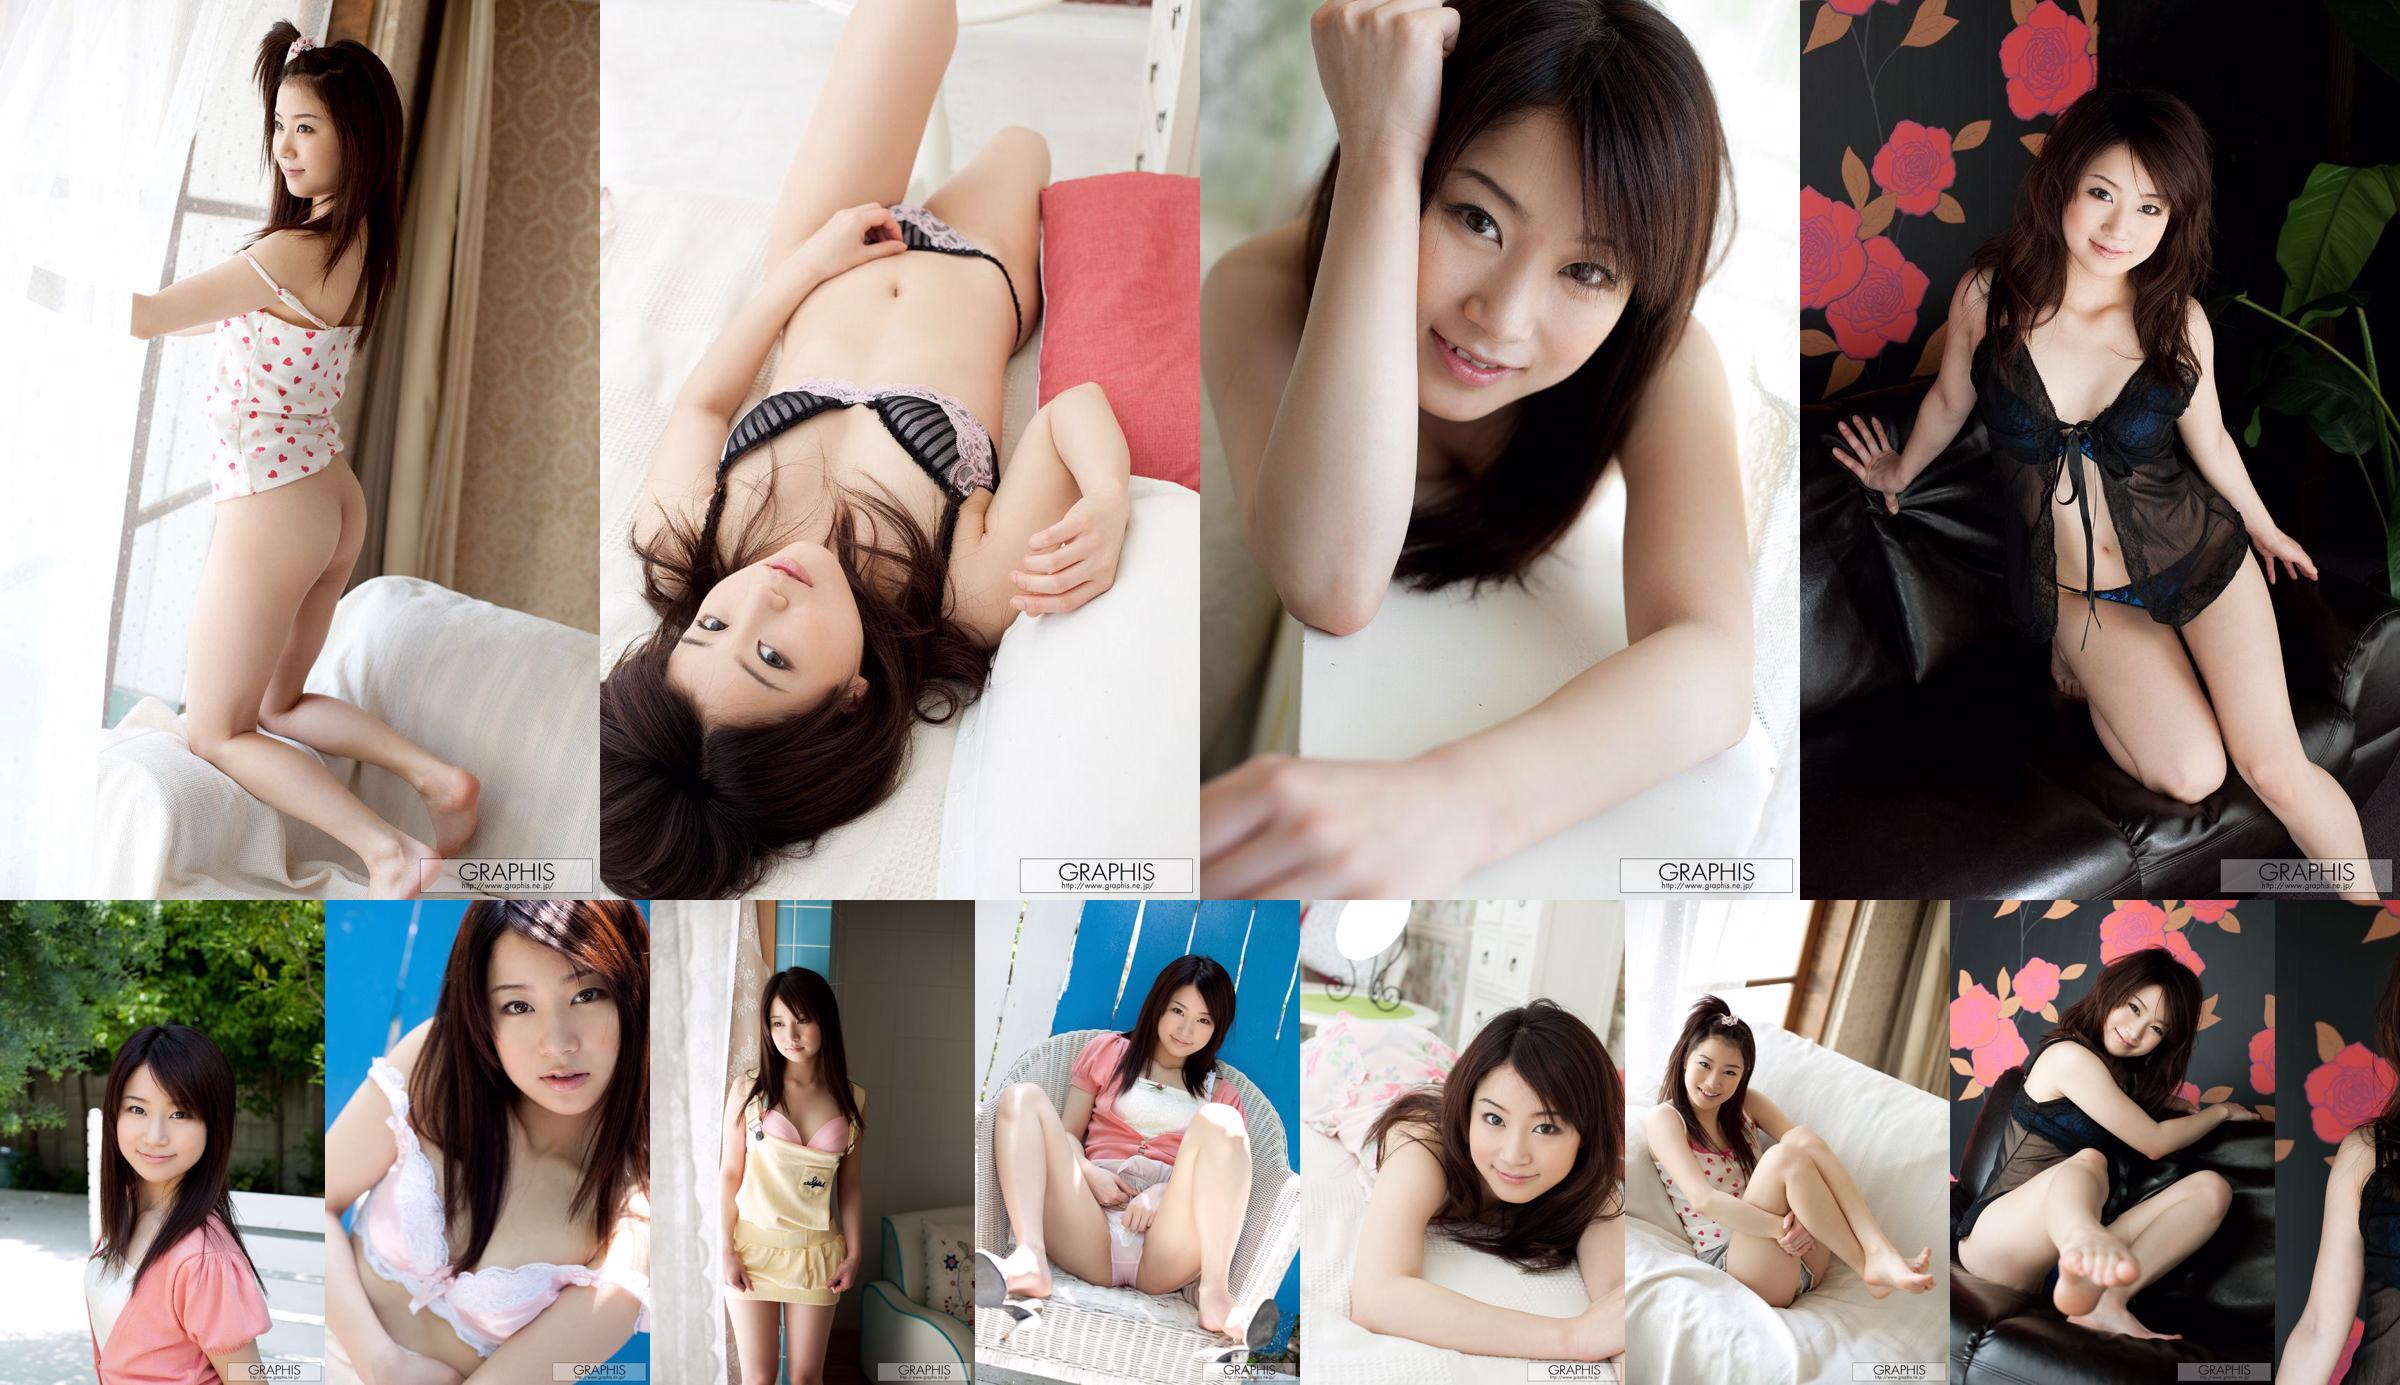 Aiyin まひろ/ Aiyin Zhenxun "Sweet Candy" [Graphis] Gals No.fcc3bb Page 1